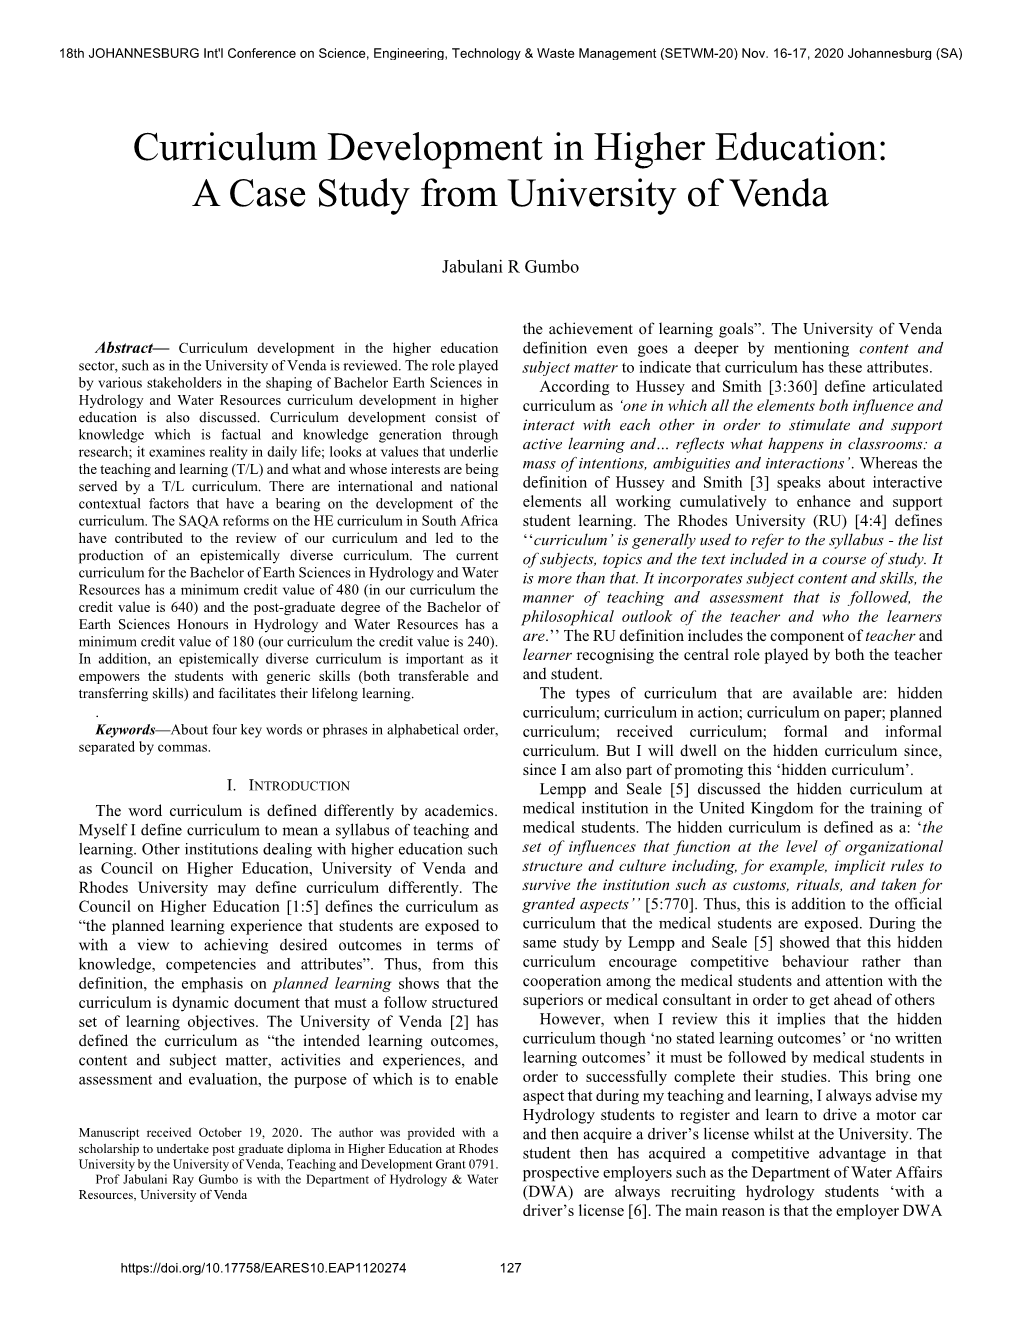 Curriculum Development in Higher Education: a Case Study from University of Venda